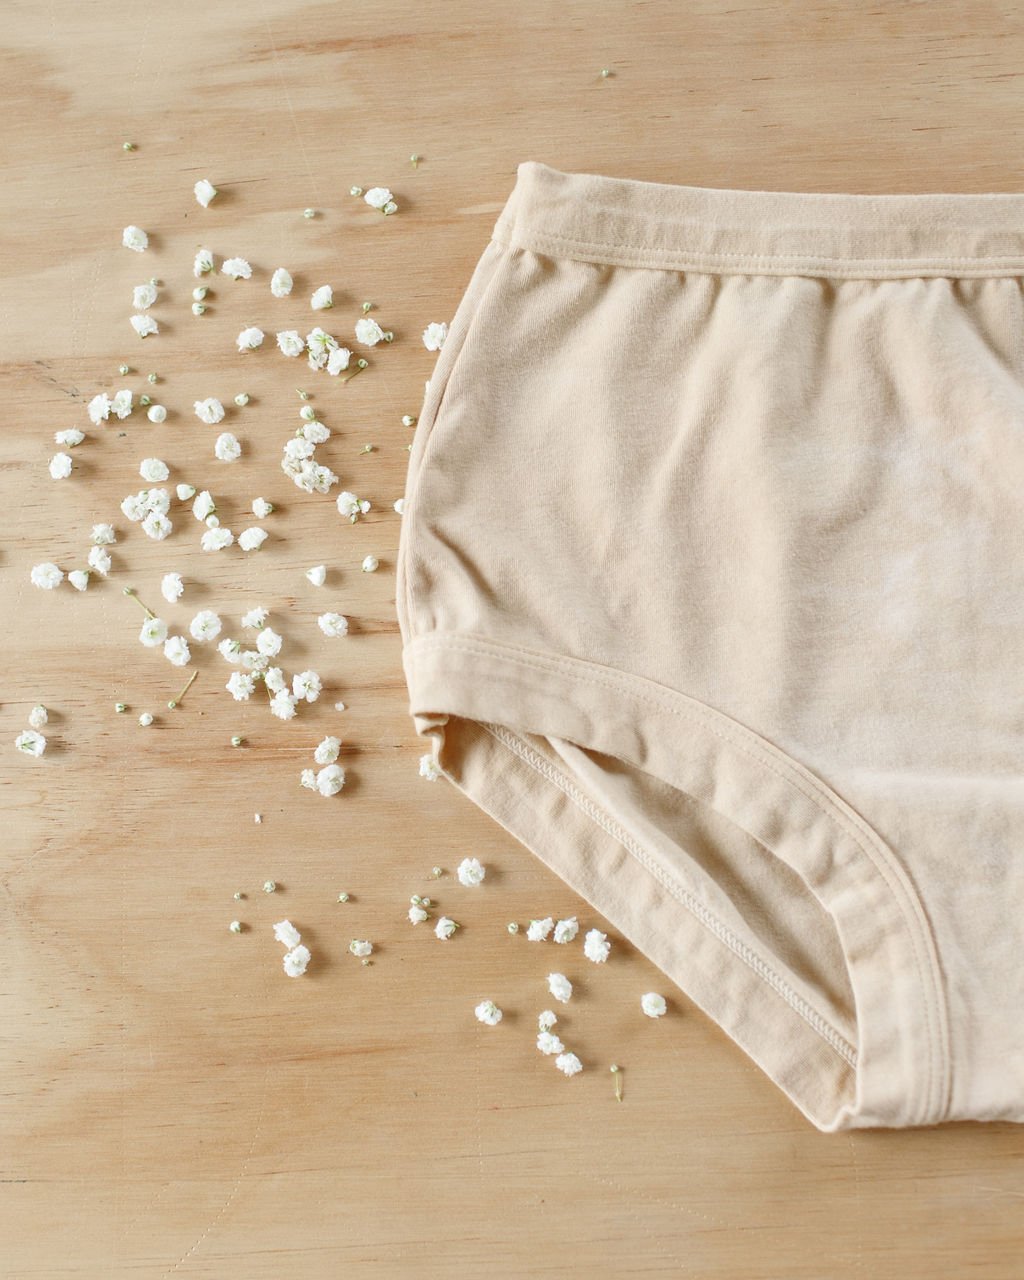 Flat lay of Thunderpants Organic Cotton Original underwear in hand dyed Latte color with white flowers  around.